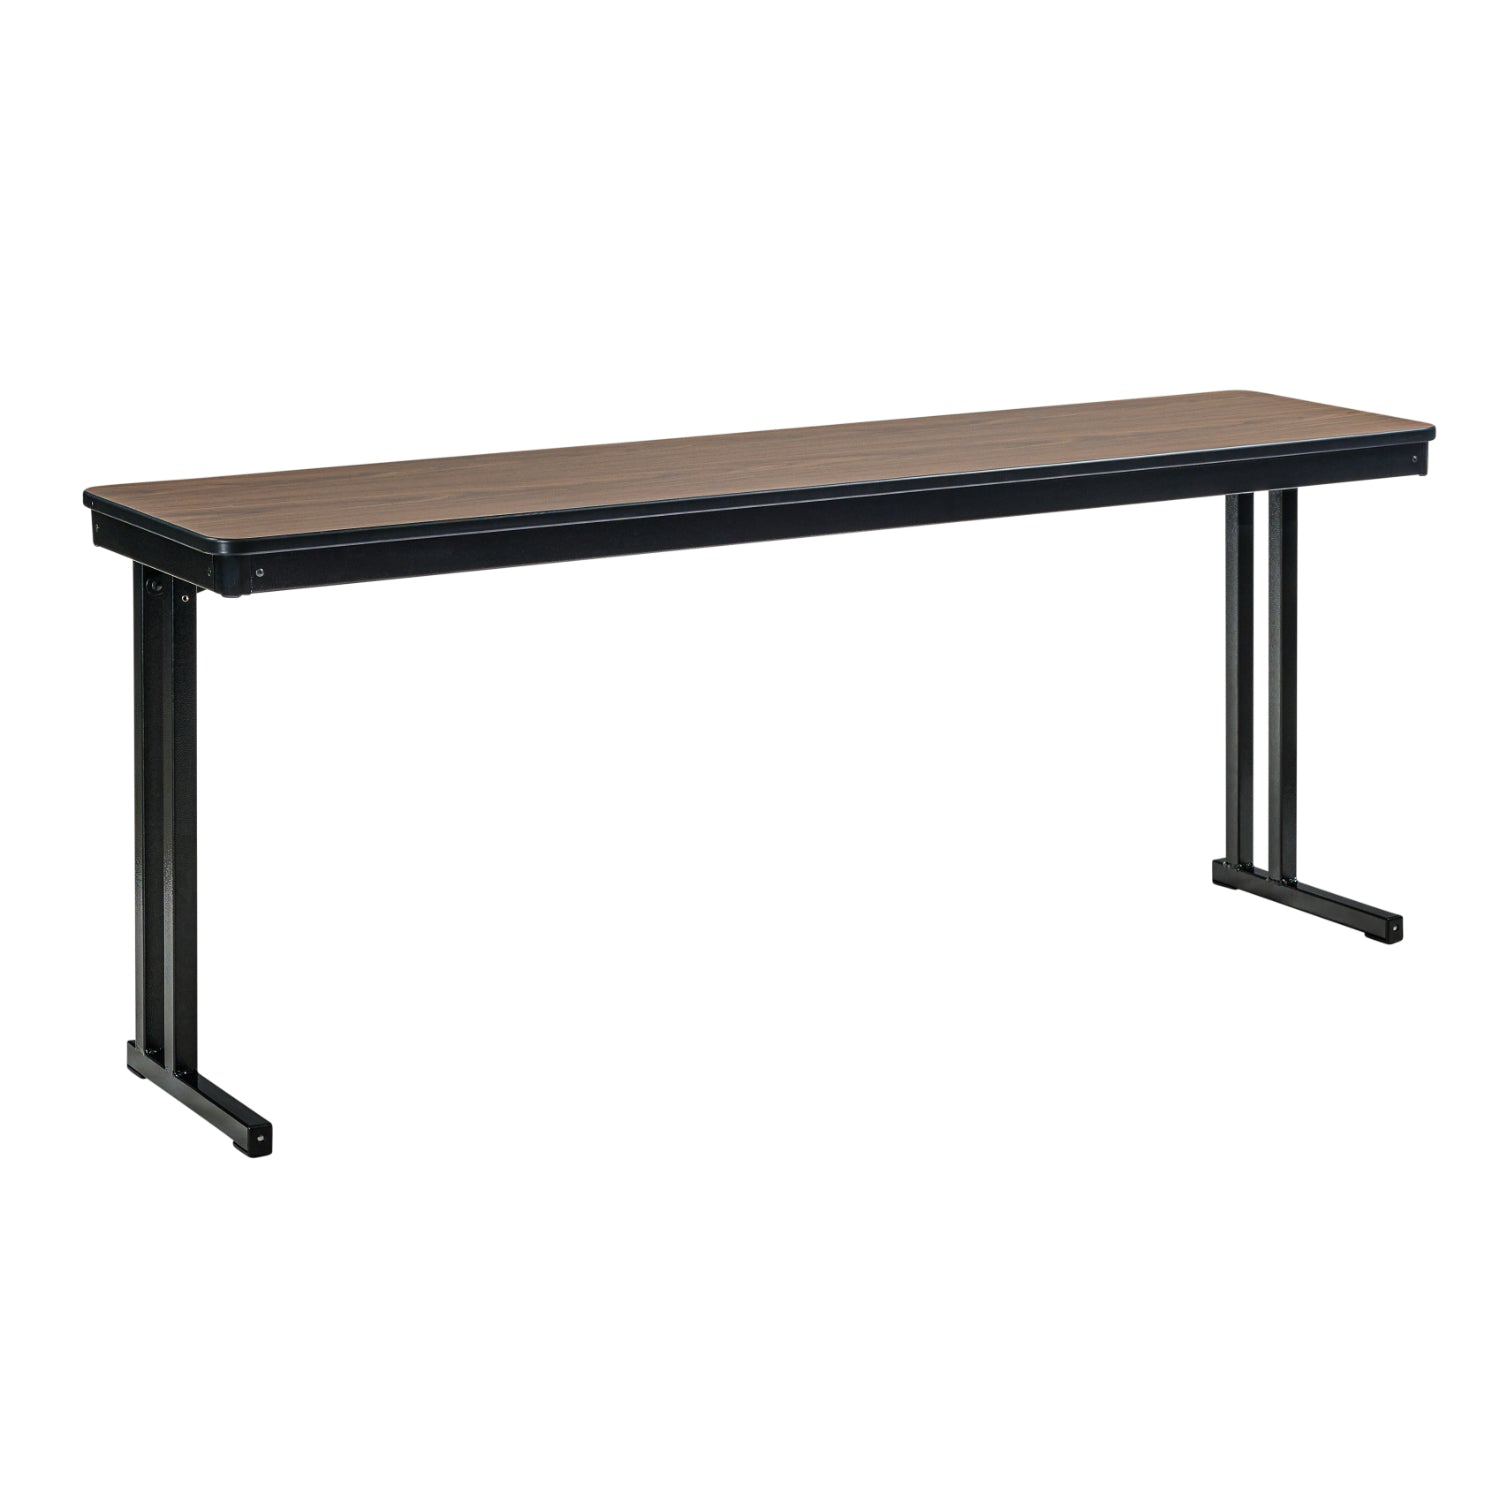 Max Seating Folding Training and Seminar Table with Cantilever Legs, 18" x 84", High Pressure Laminate Top with MDF Core/ProtectEdge